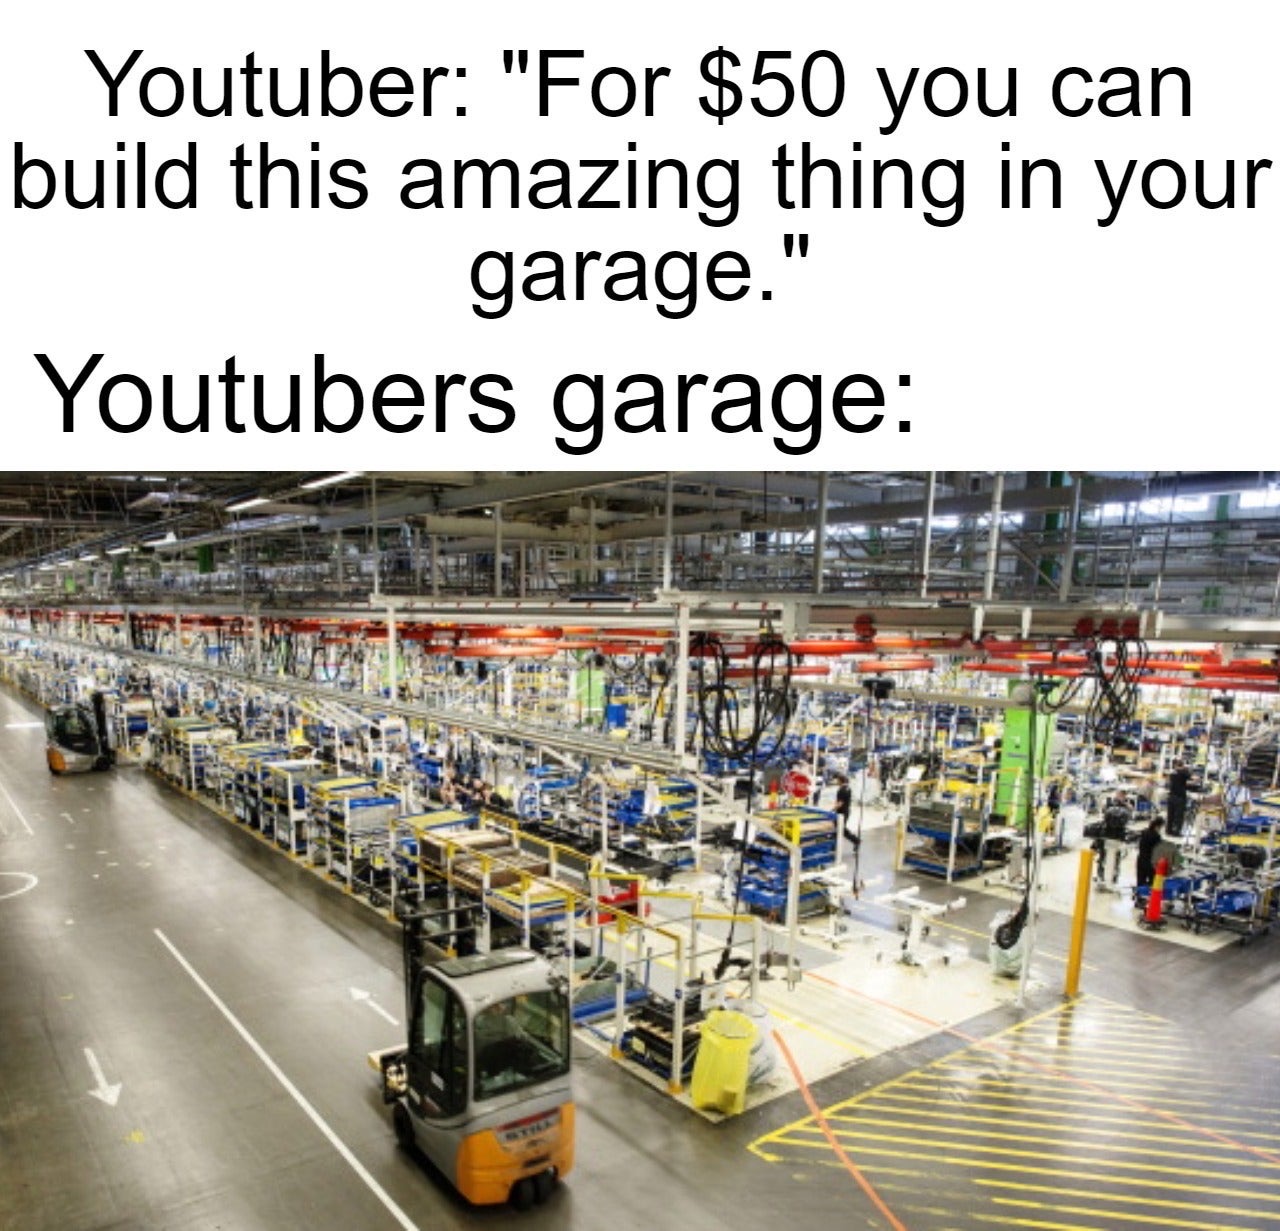 factory - Youtuber "For $50 you can build this amazing thing in your garage." Youtubers garage